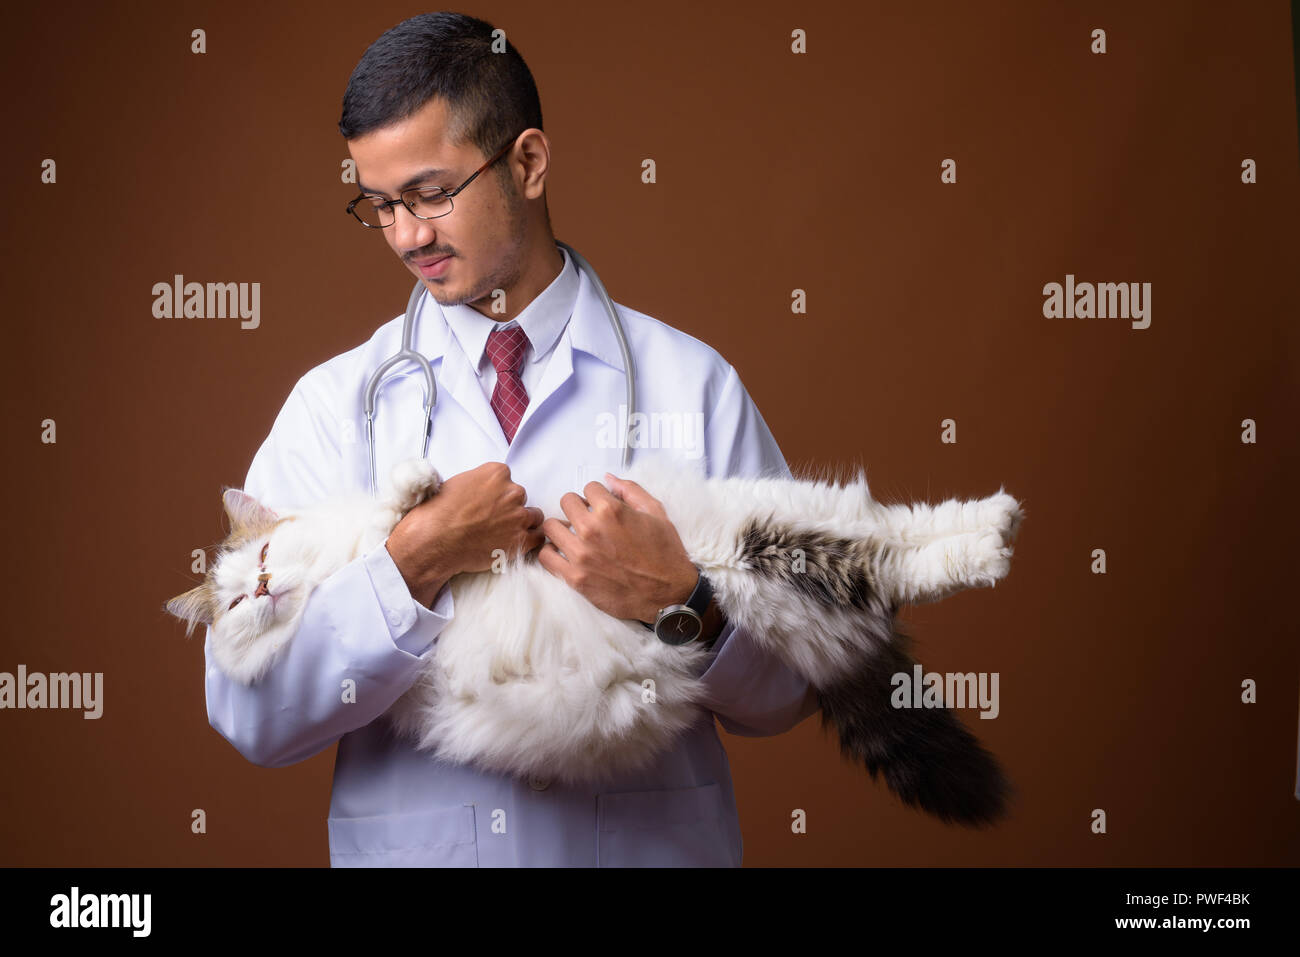 Young multi-ethnic Asian man doctor against brown background Stock Photo